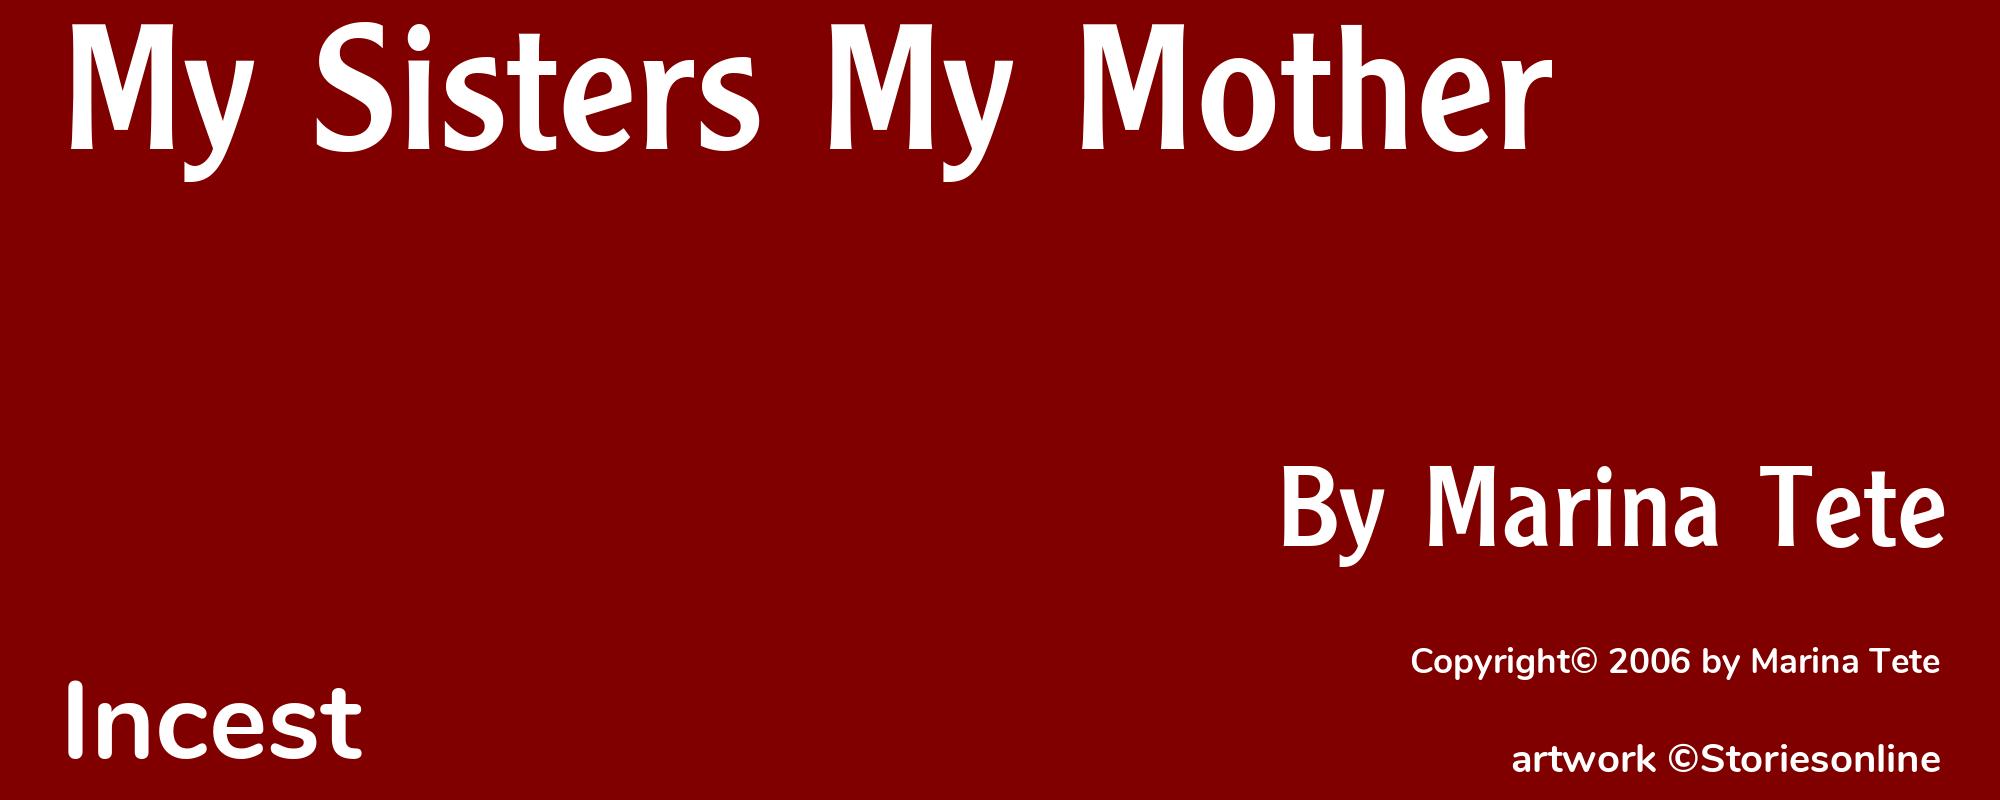 My Sisters My Mother - Cover